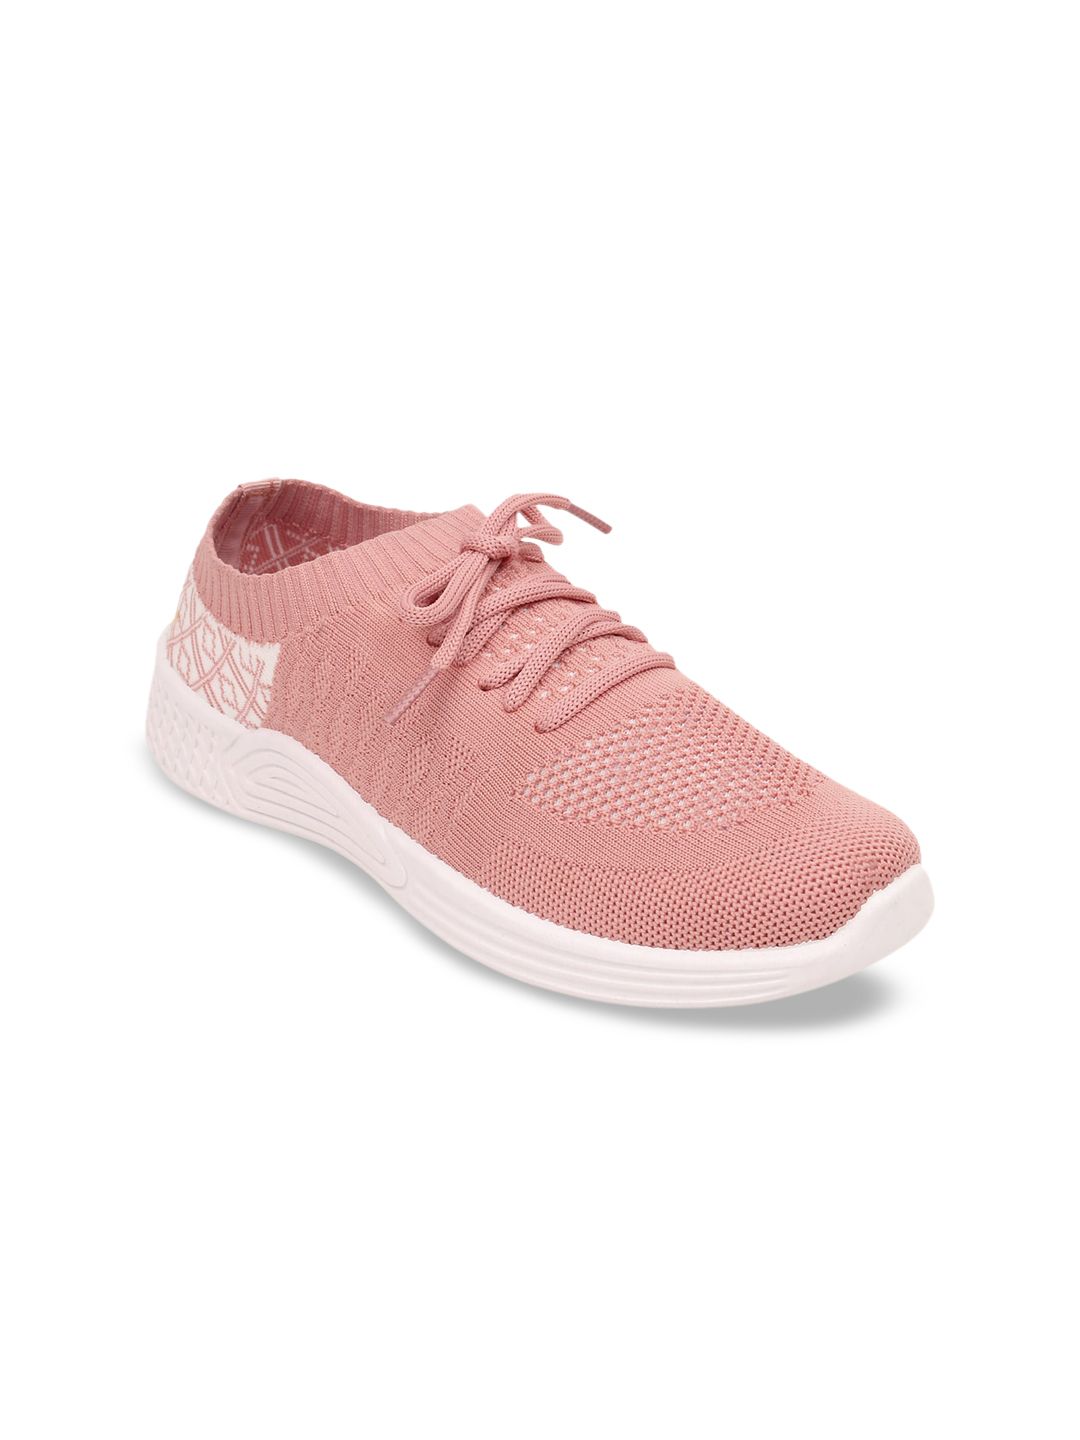 Champs Women Peach-Coloured Woven Design Sneakers Price in India